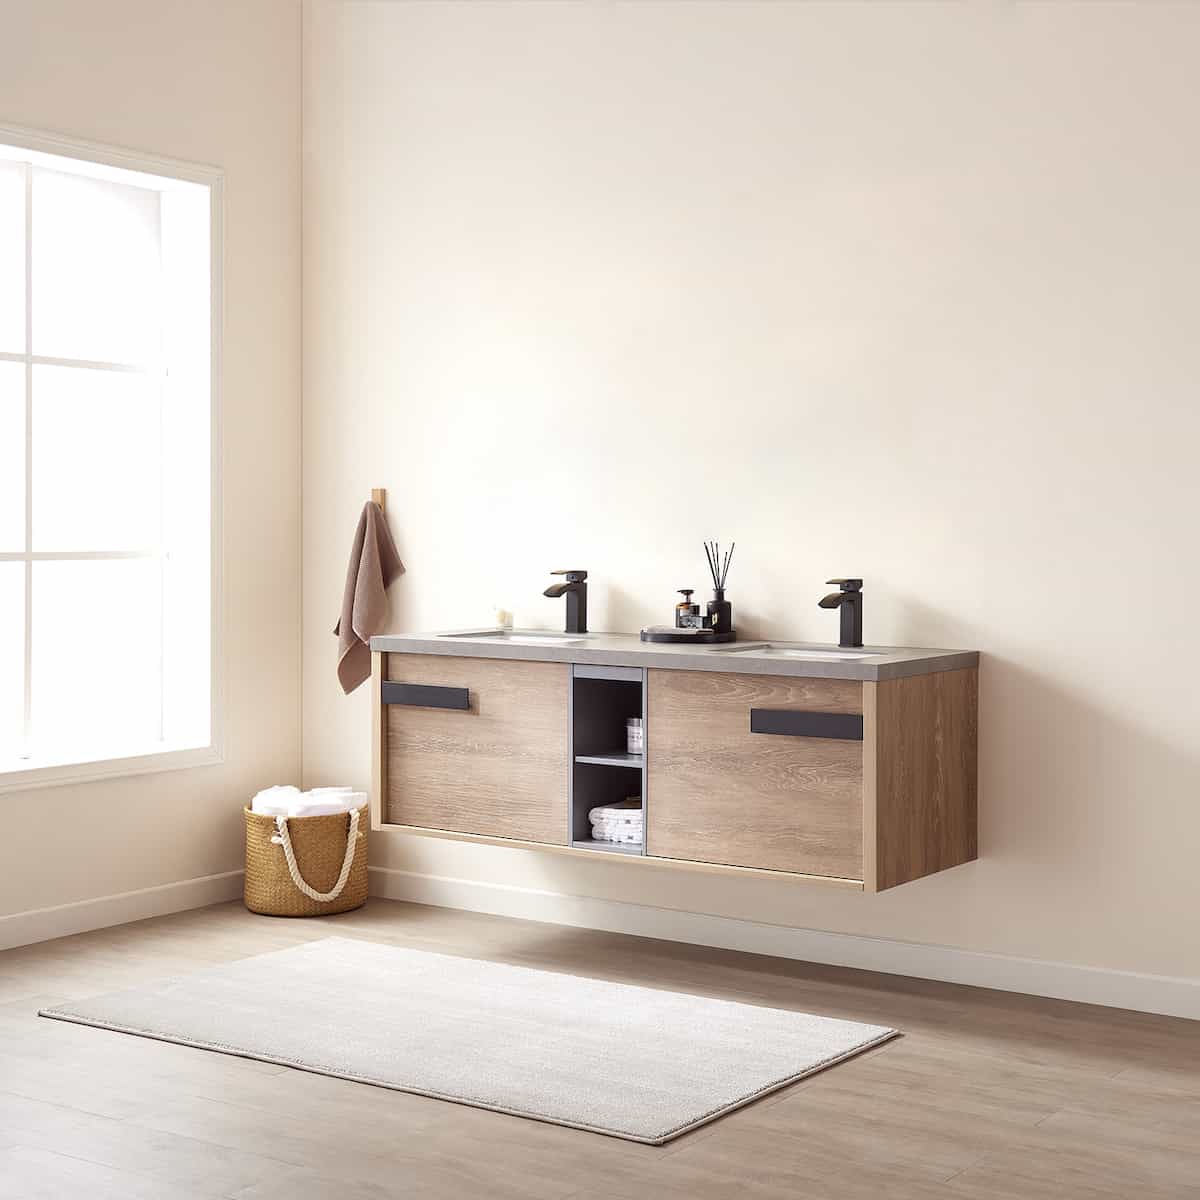 Vinnova Carcastillo 63 Inch Wall Mount Single Sink Vanity in North American Oak with Grey Sintered Stone Top Without Mirror Side 703263-NO-WK-NM #mirror_without mirror